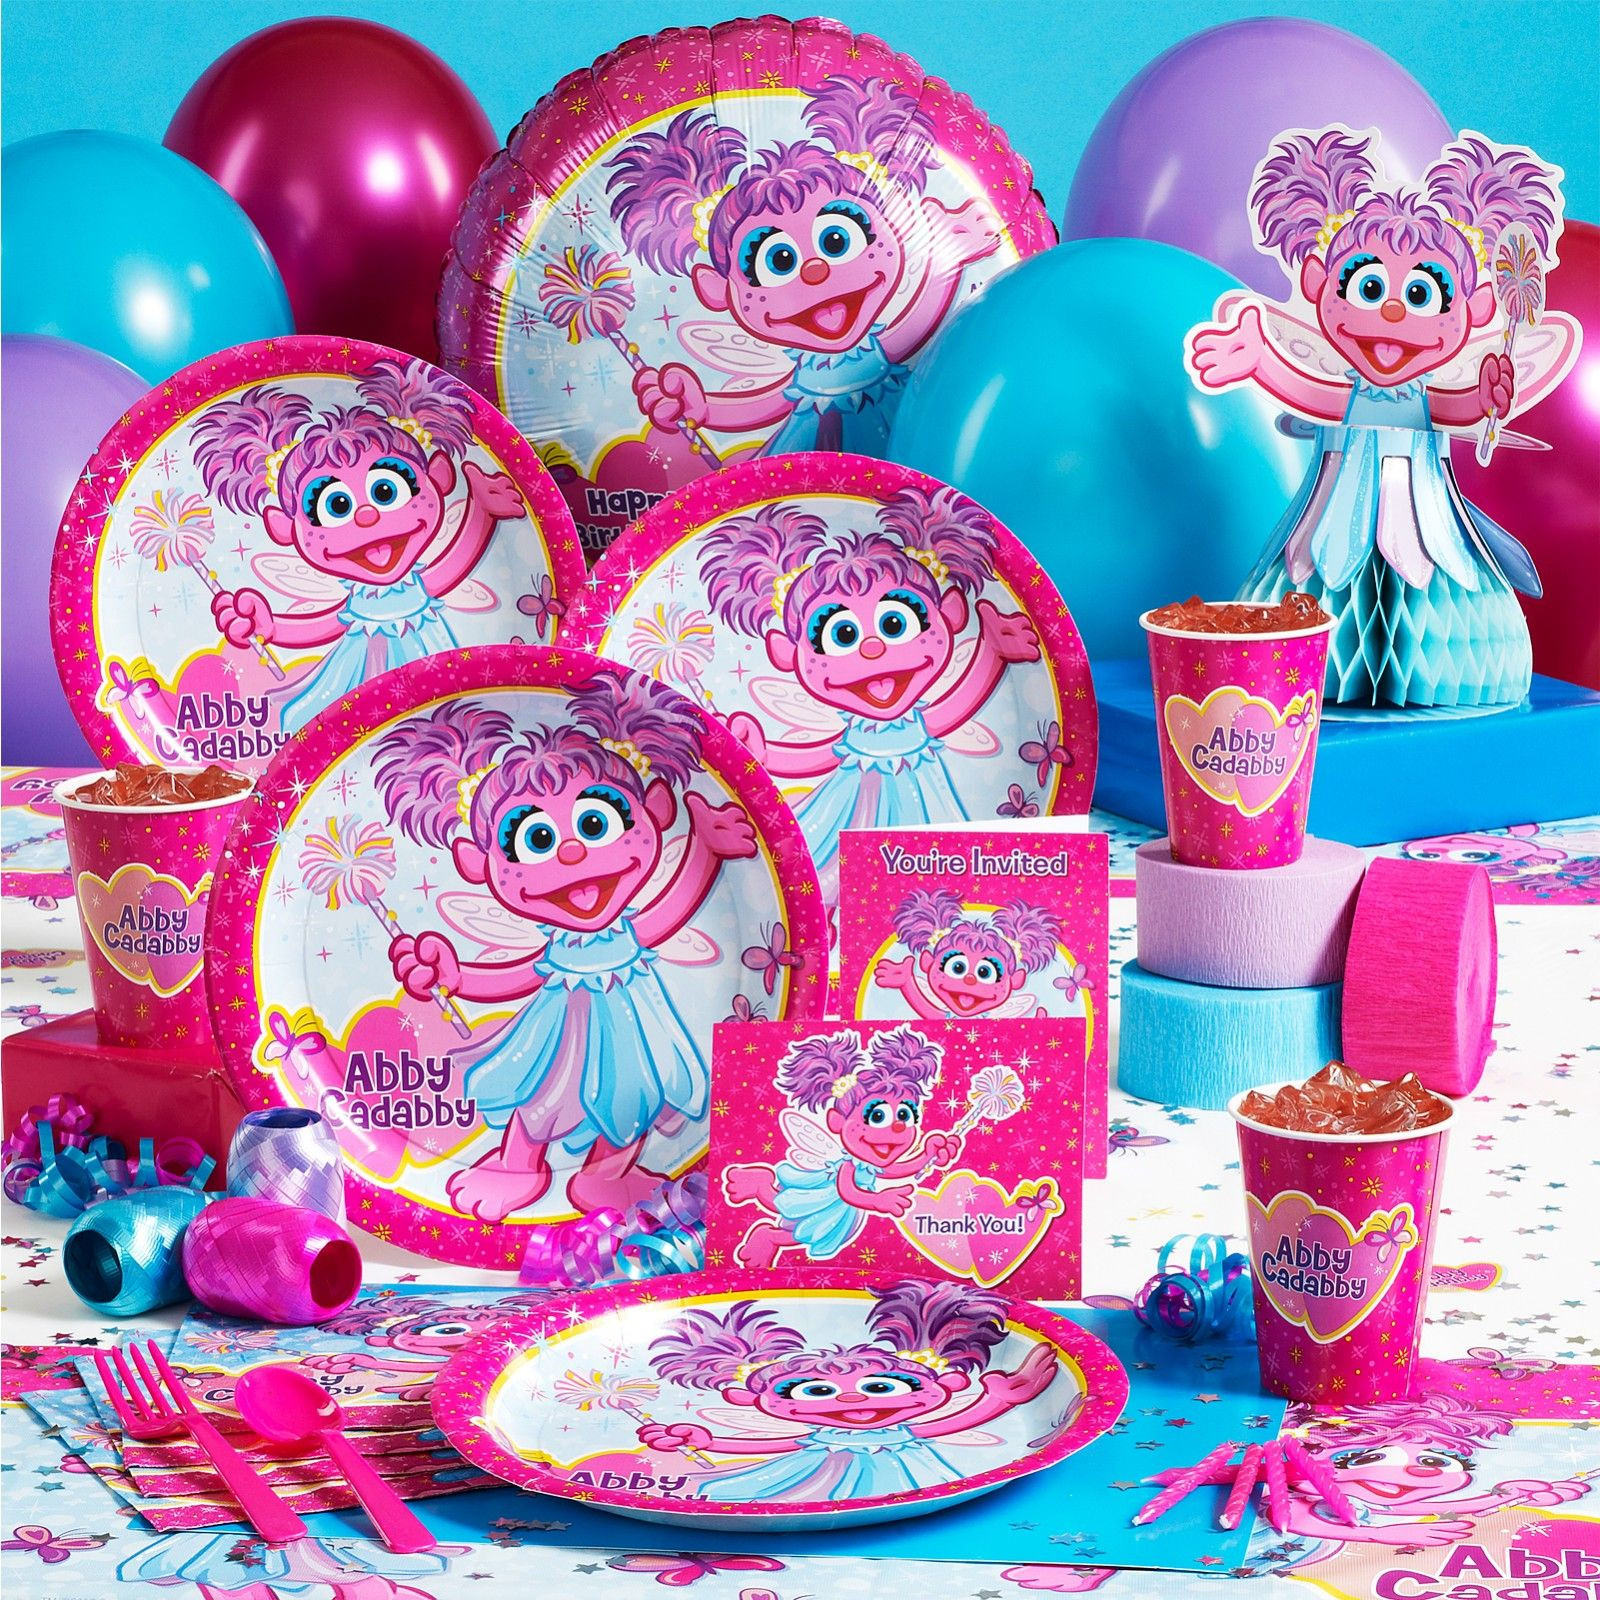 Sesame Street Birthday Party Supplies
 Abby Cadabby Party Supplies Pairs well with Elmo and